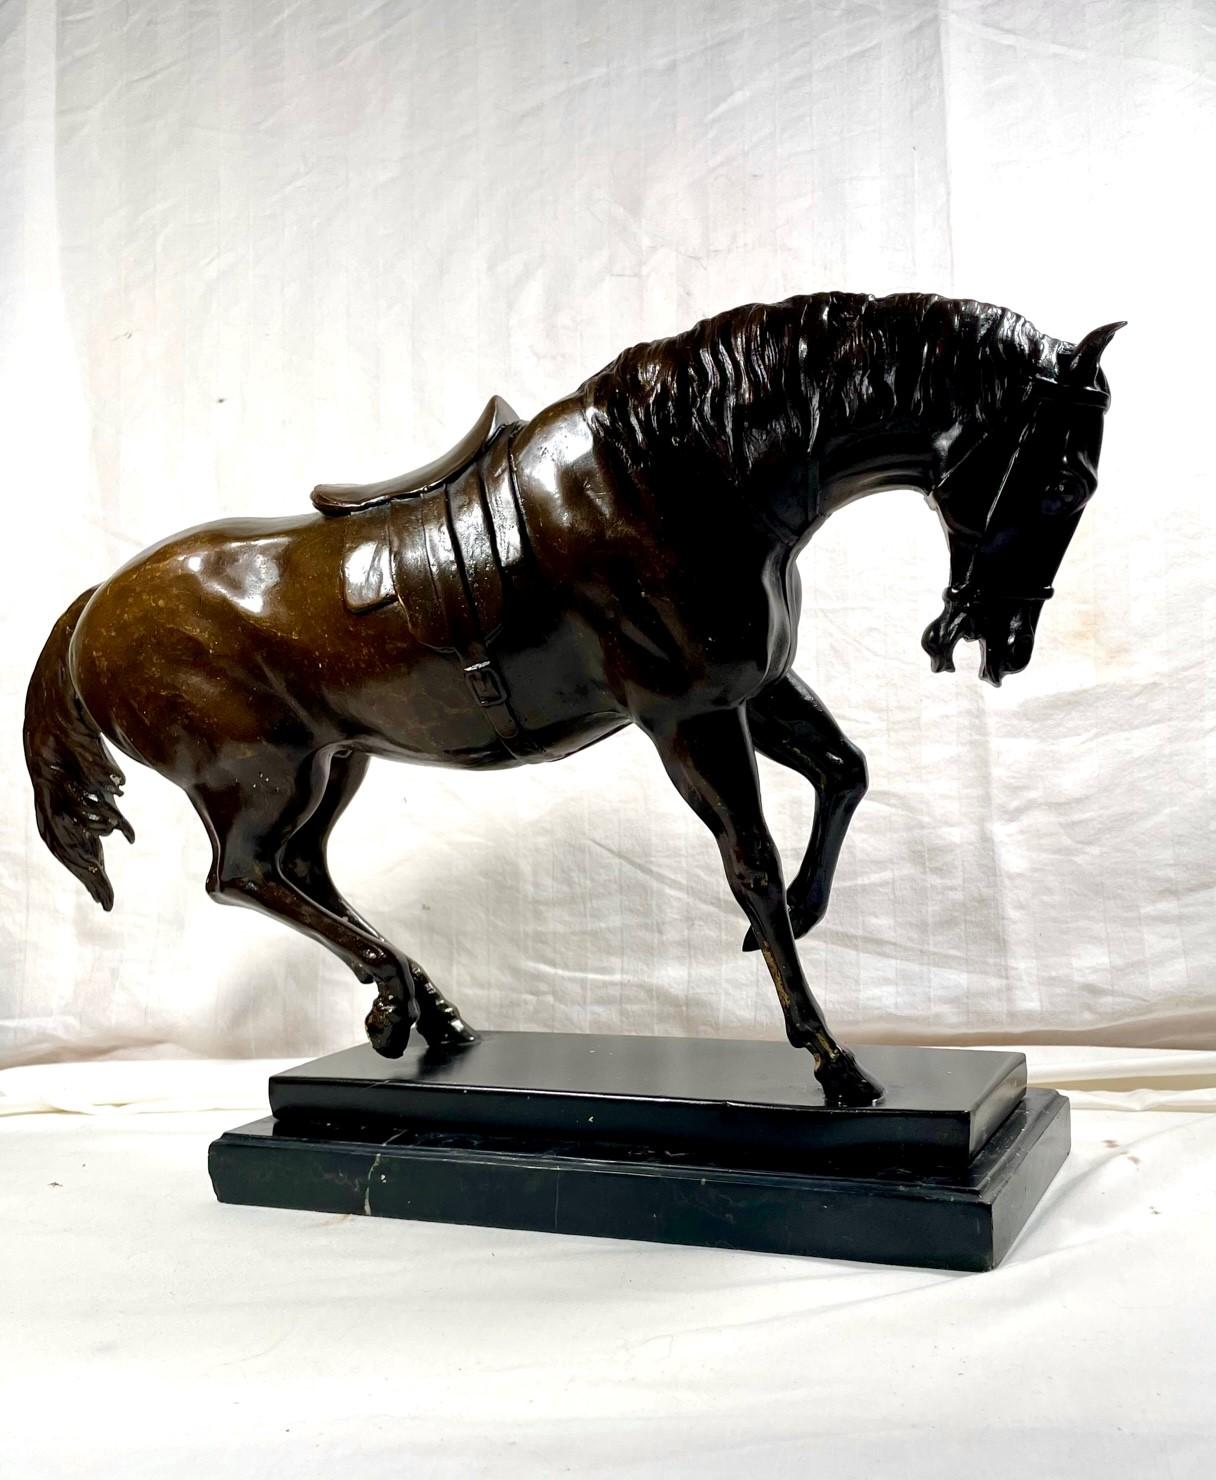 French Bronze Equine Statue after Pierre-Jules Mene.

Fabulous French animalier bronze features an elegant horse captured in an energetic pose. Bowing the head down represents its noble class with vigorous spirit and driving force. A saddle is